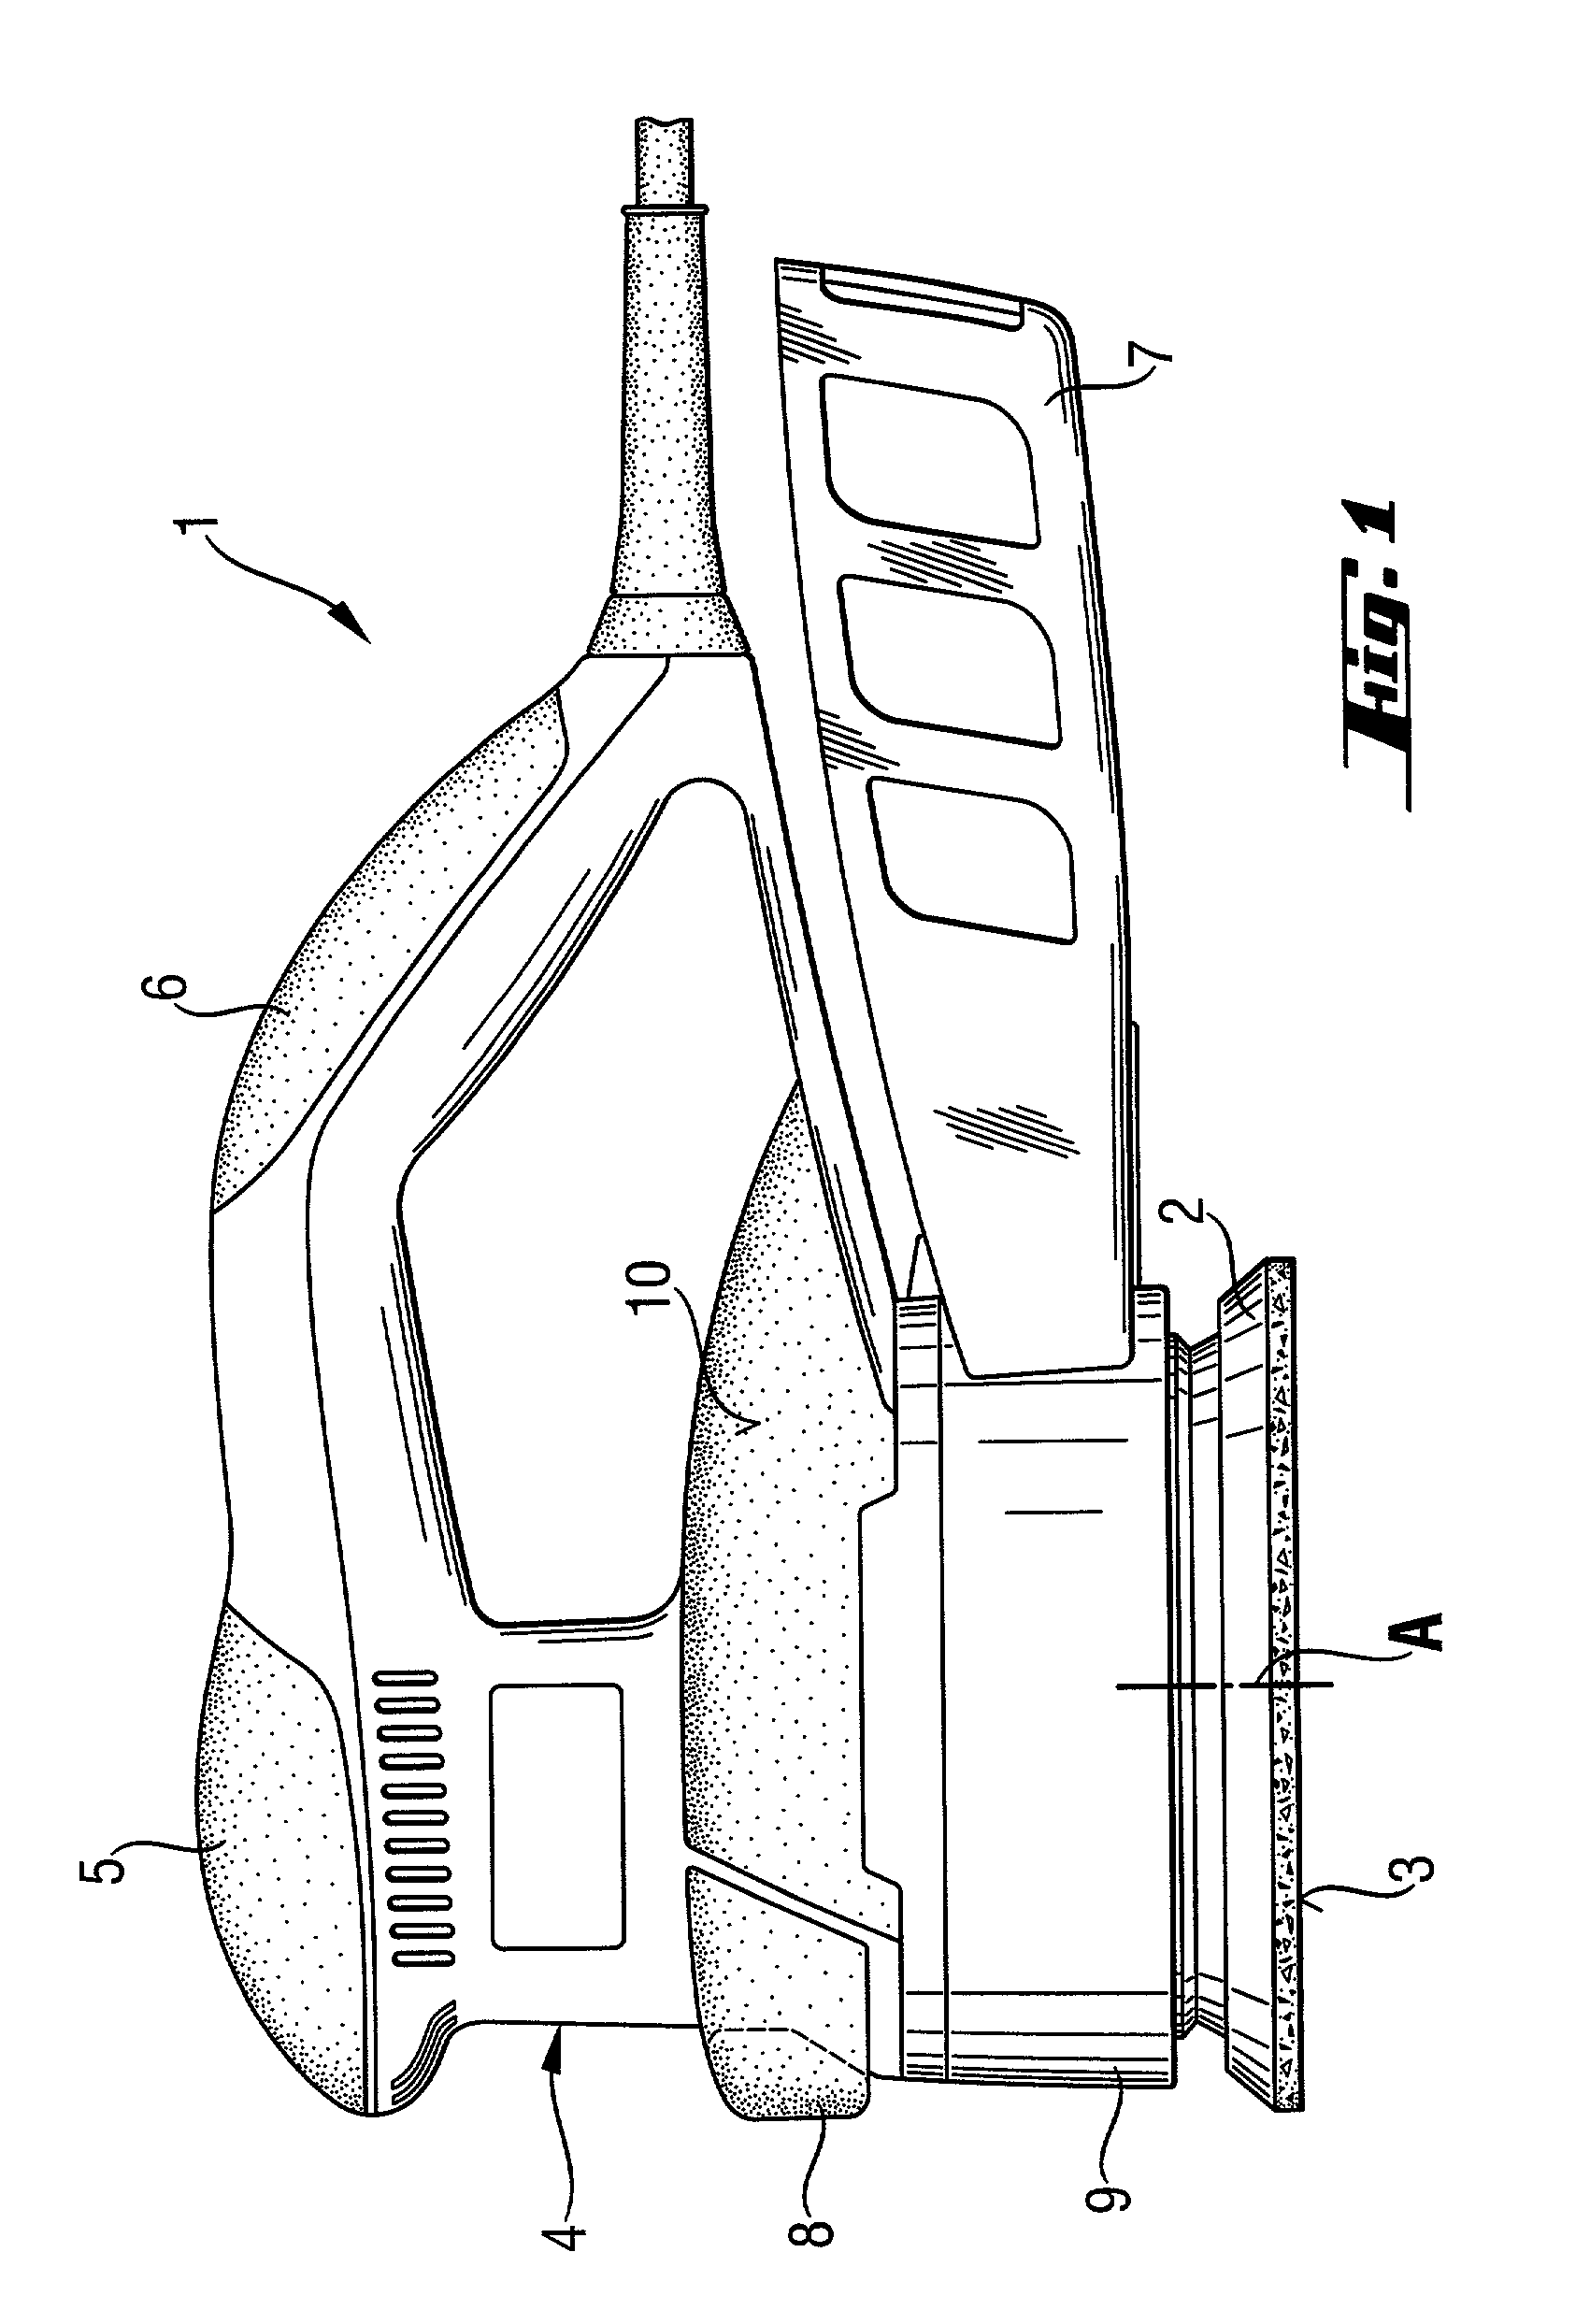 Hand-guided grinding or sanding device